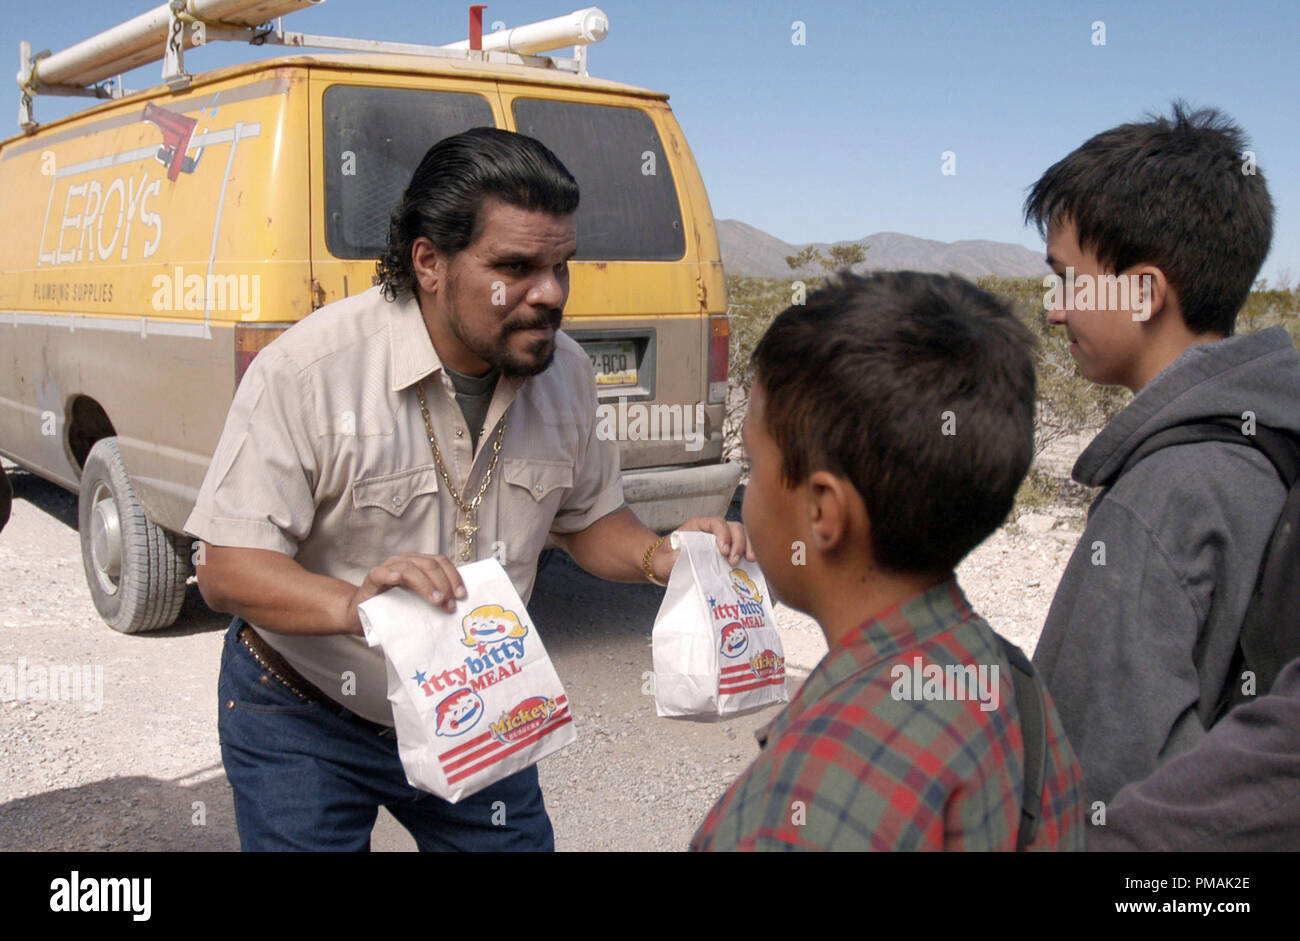 Luiz Guzman in FAST FOOD NATION Fast Food Nation" (2006) Fox Searchlight Pictures Stockfoto